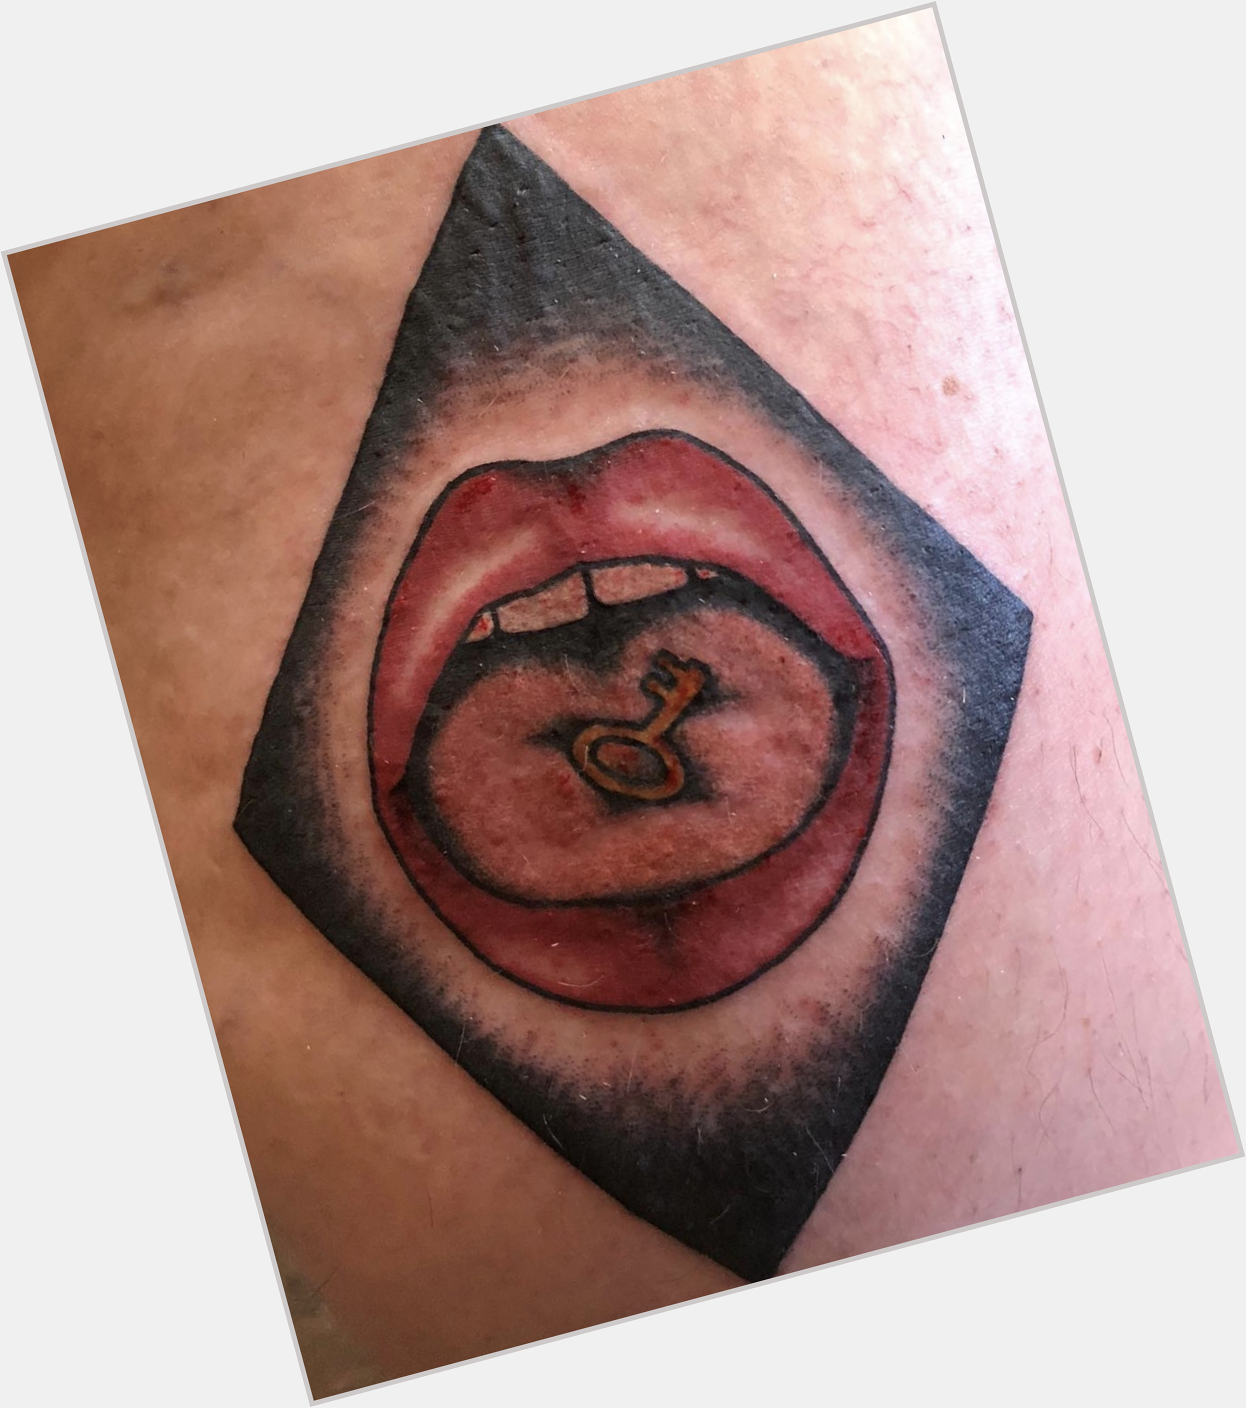 Happy birthday to kate bush my favorite singer of all time whose mouth I have tattooed on my leg 